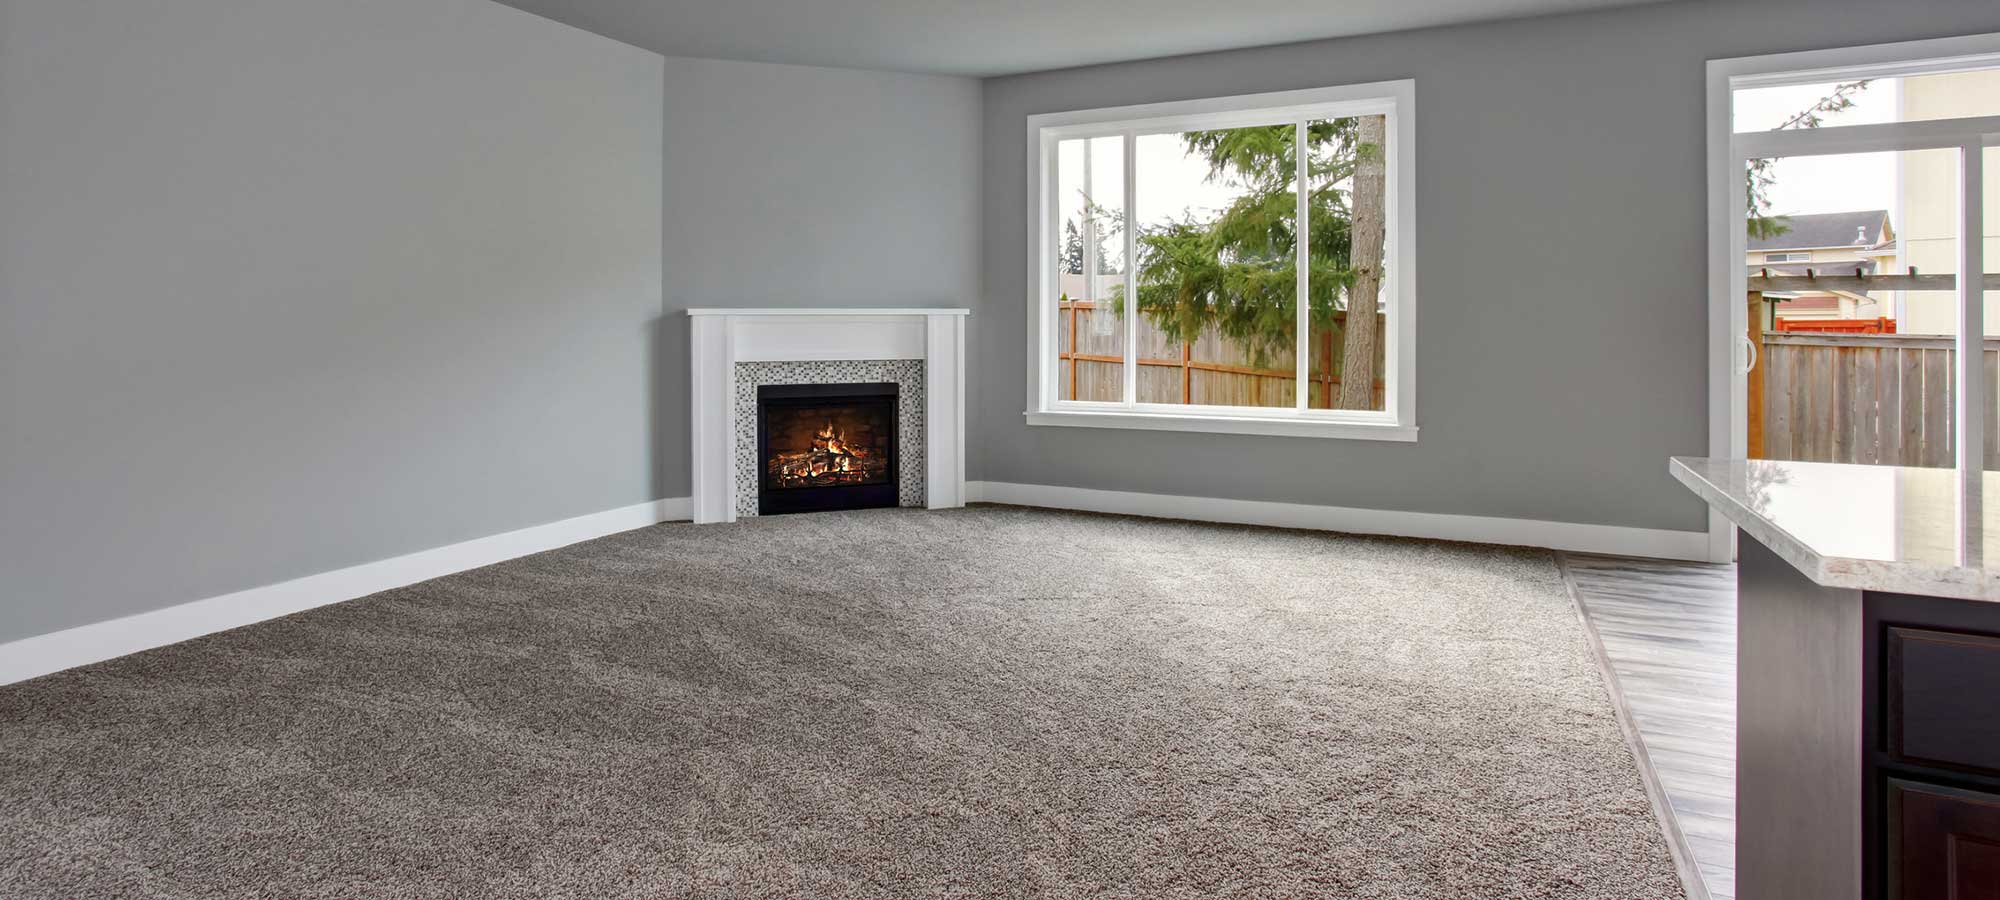 Hundreds of colors and styles of Carpet Flooring on sale now; serving the Portland, Oregon Metro area